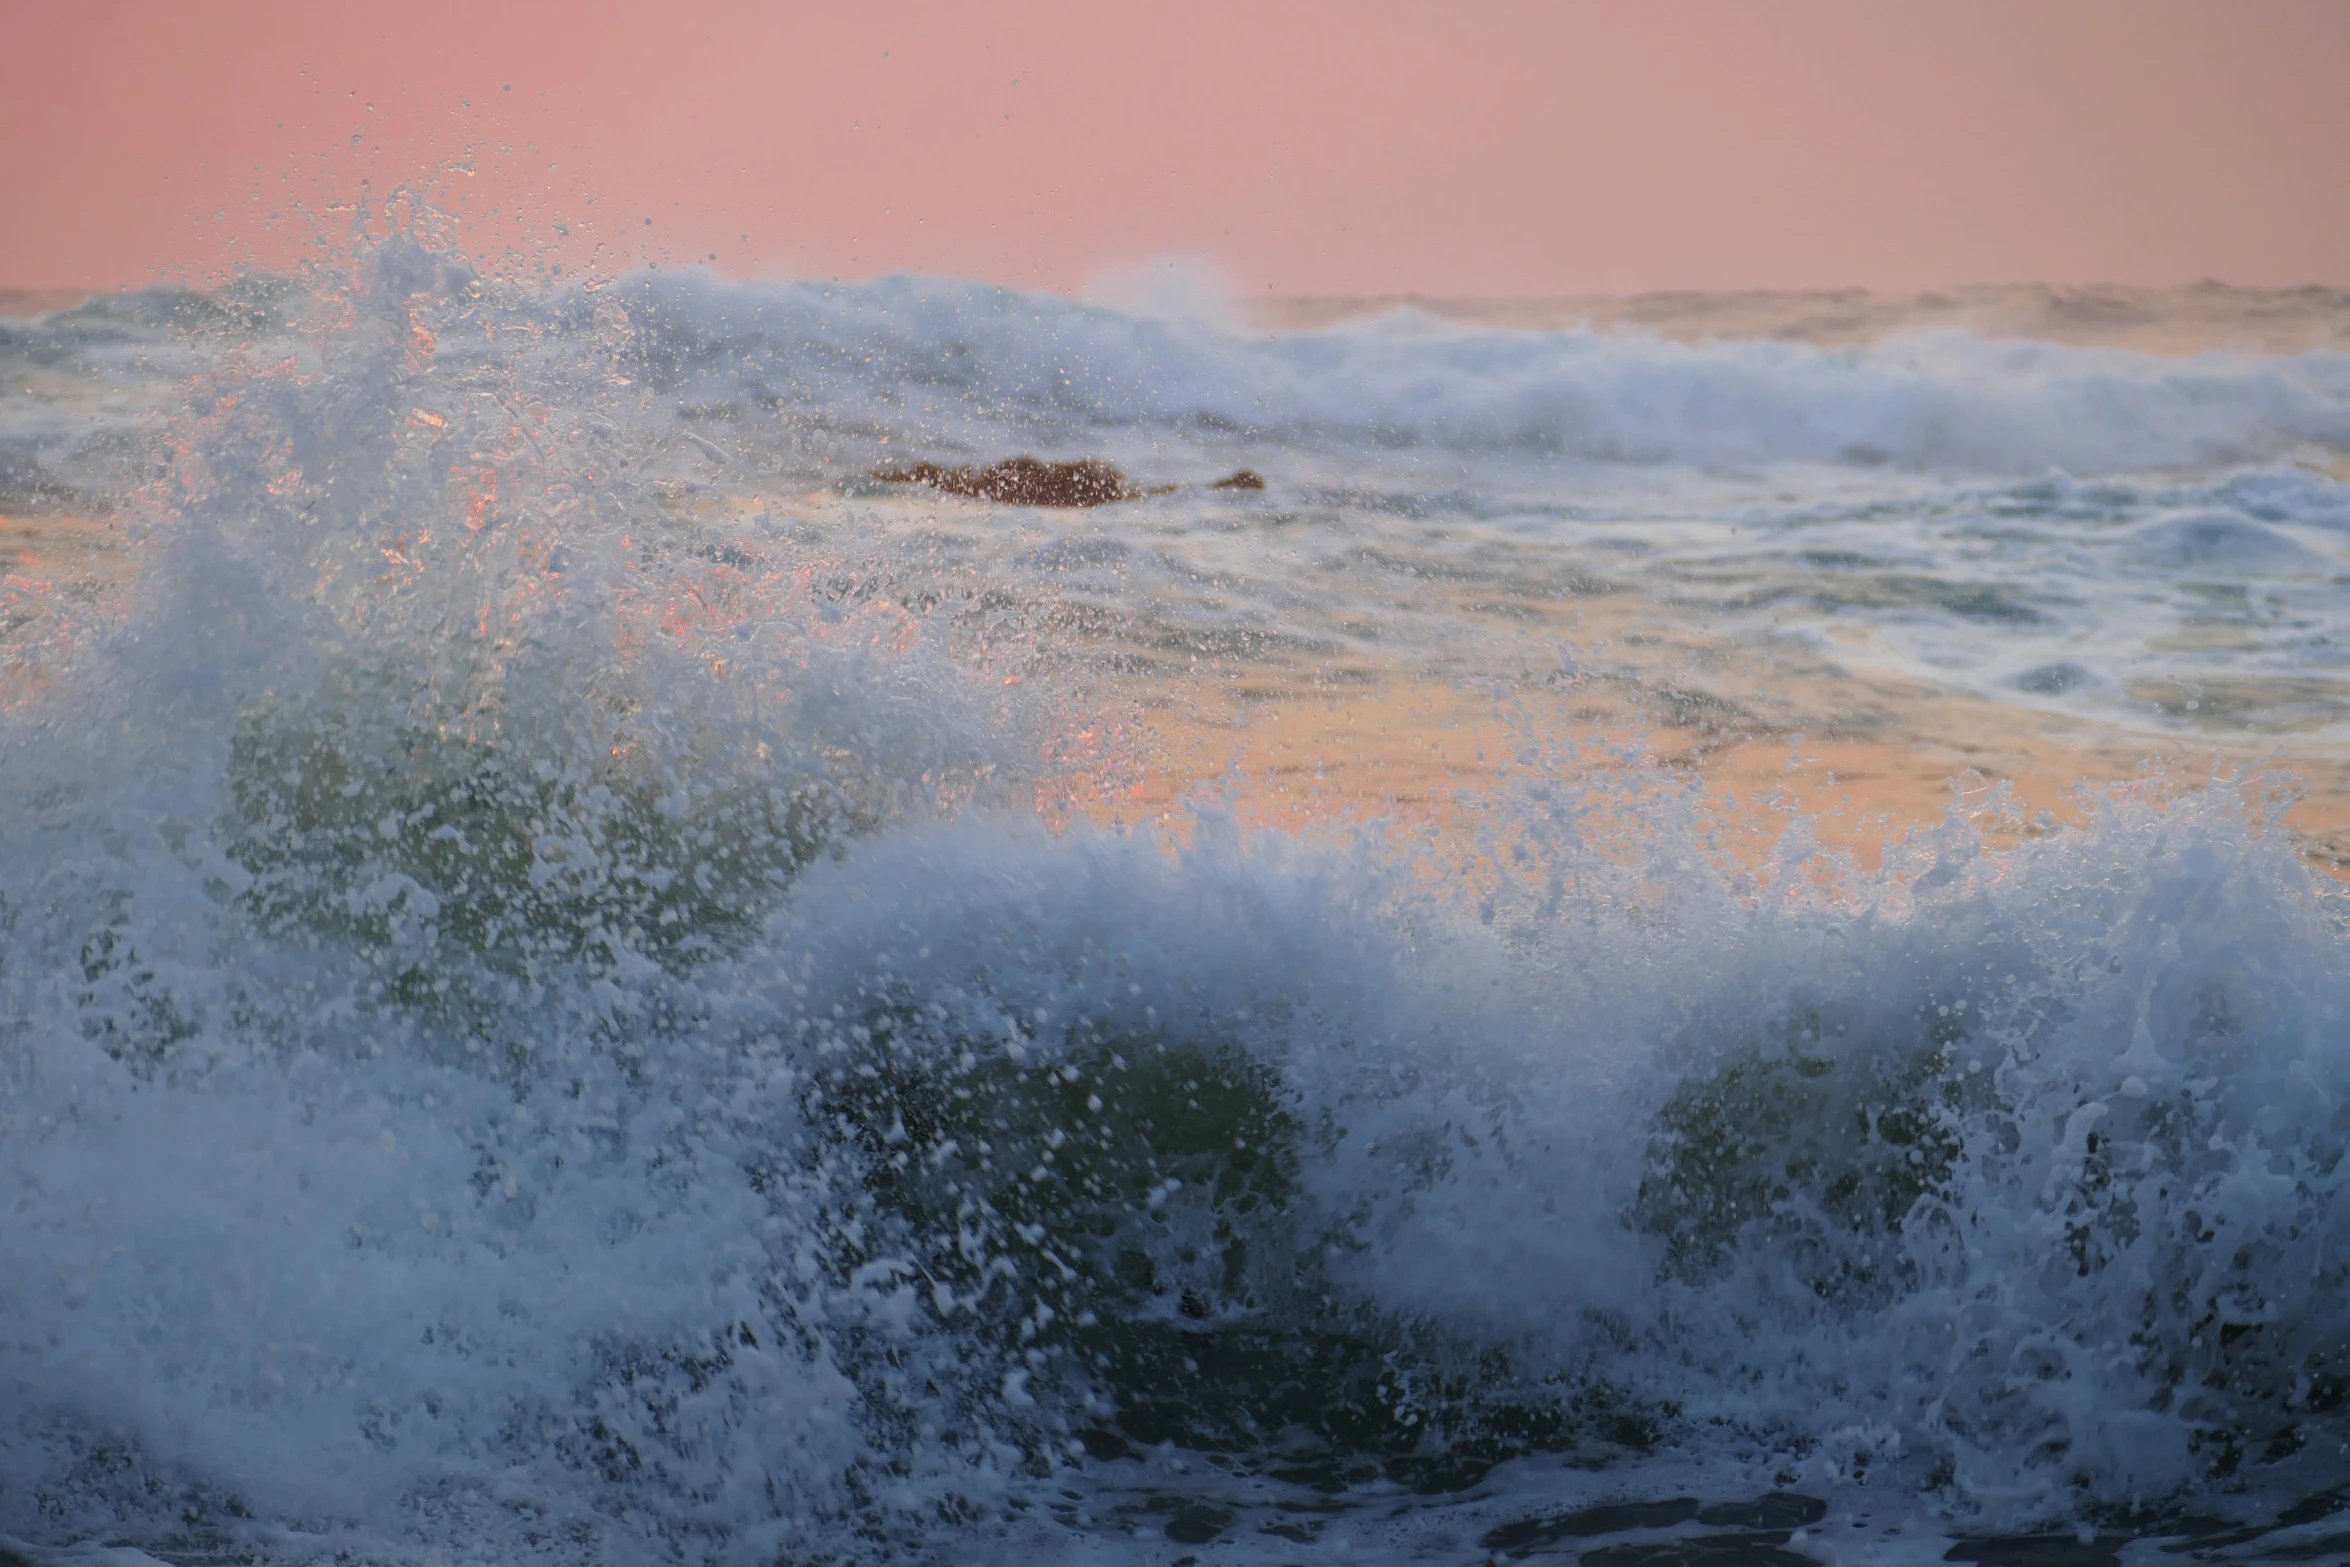 a wave crashes and spreads as the sun sets